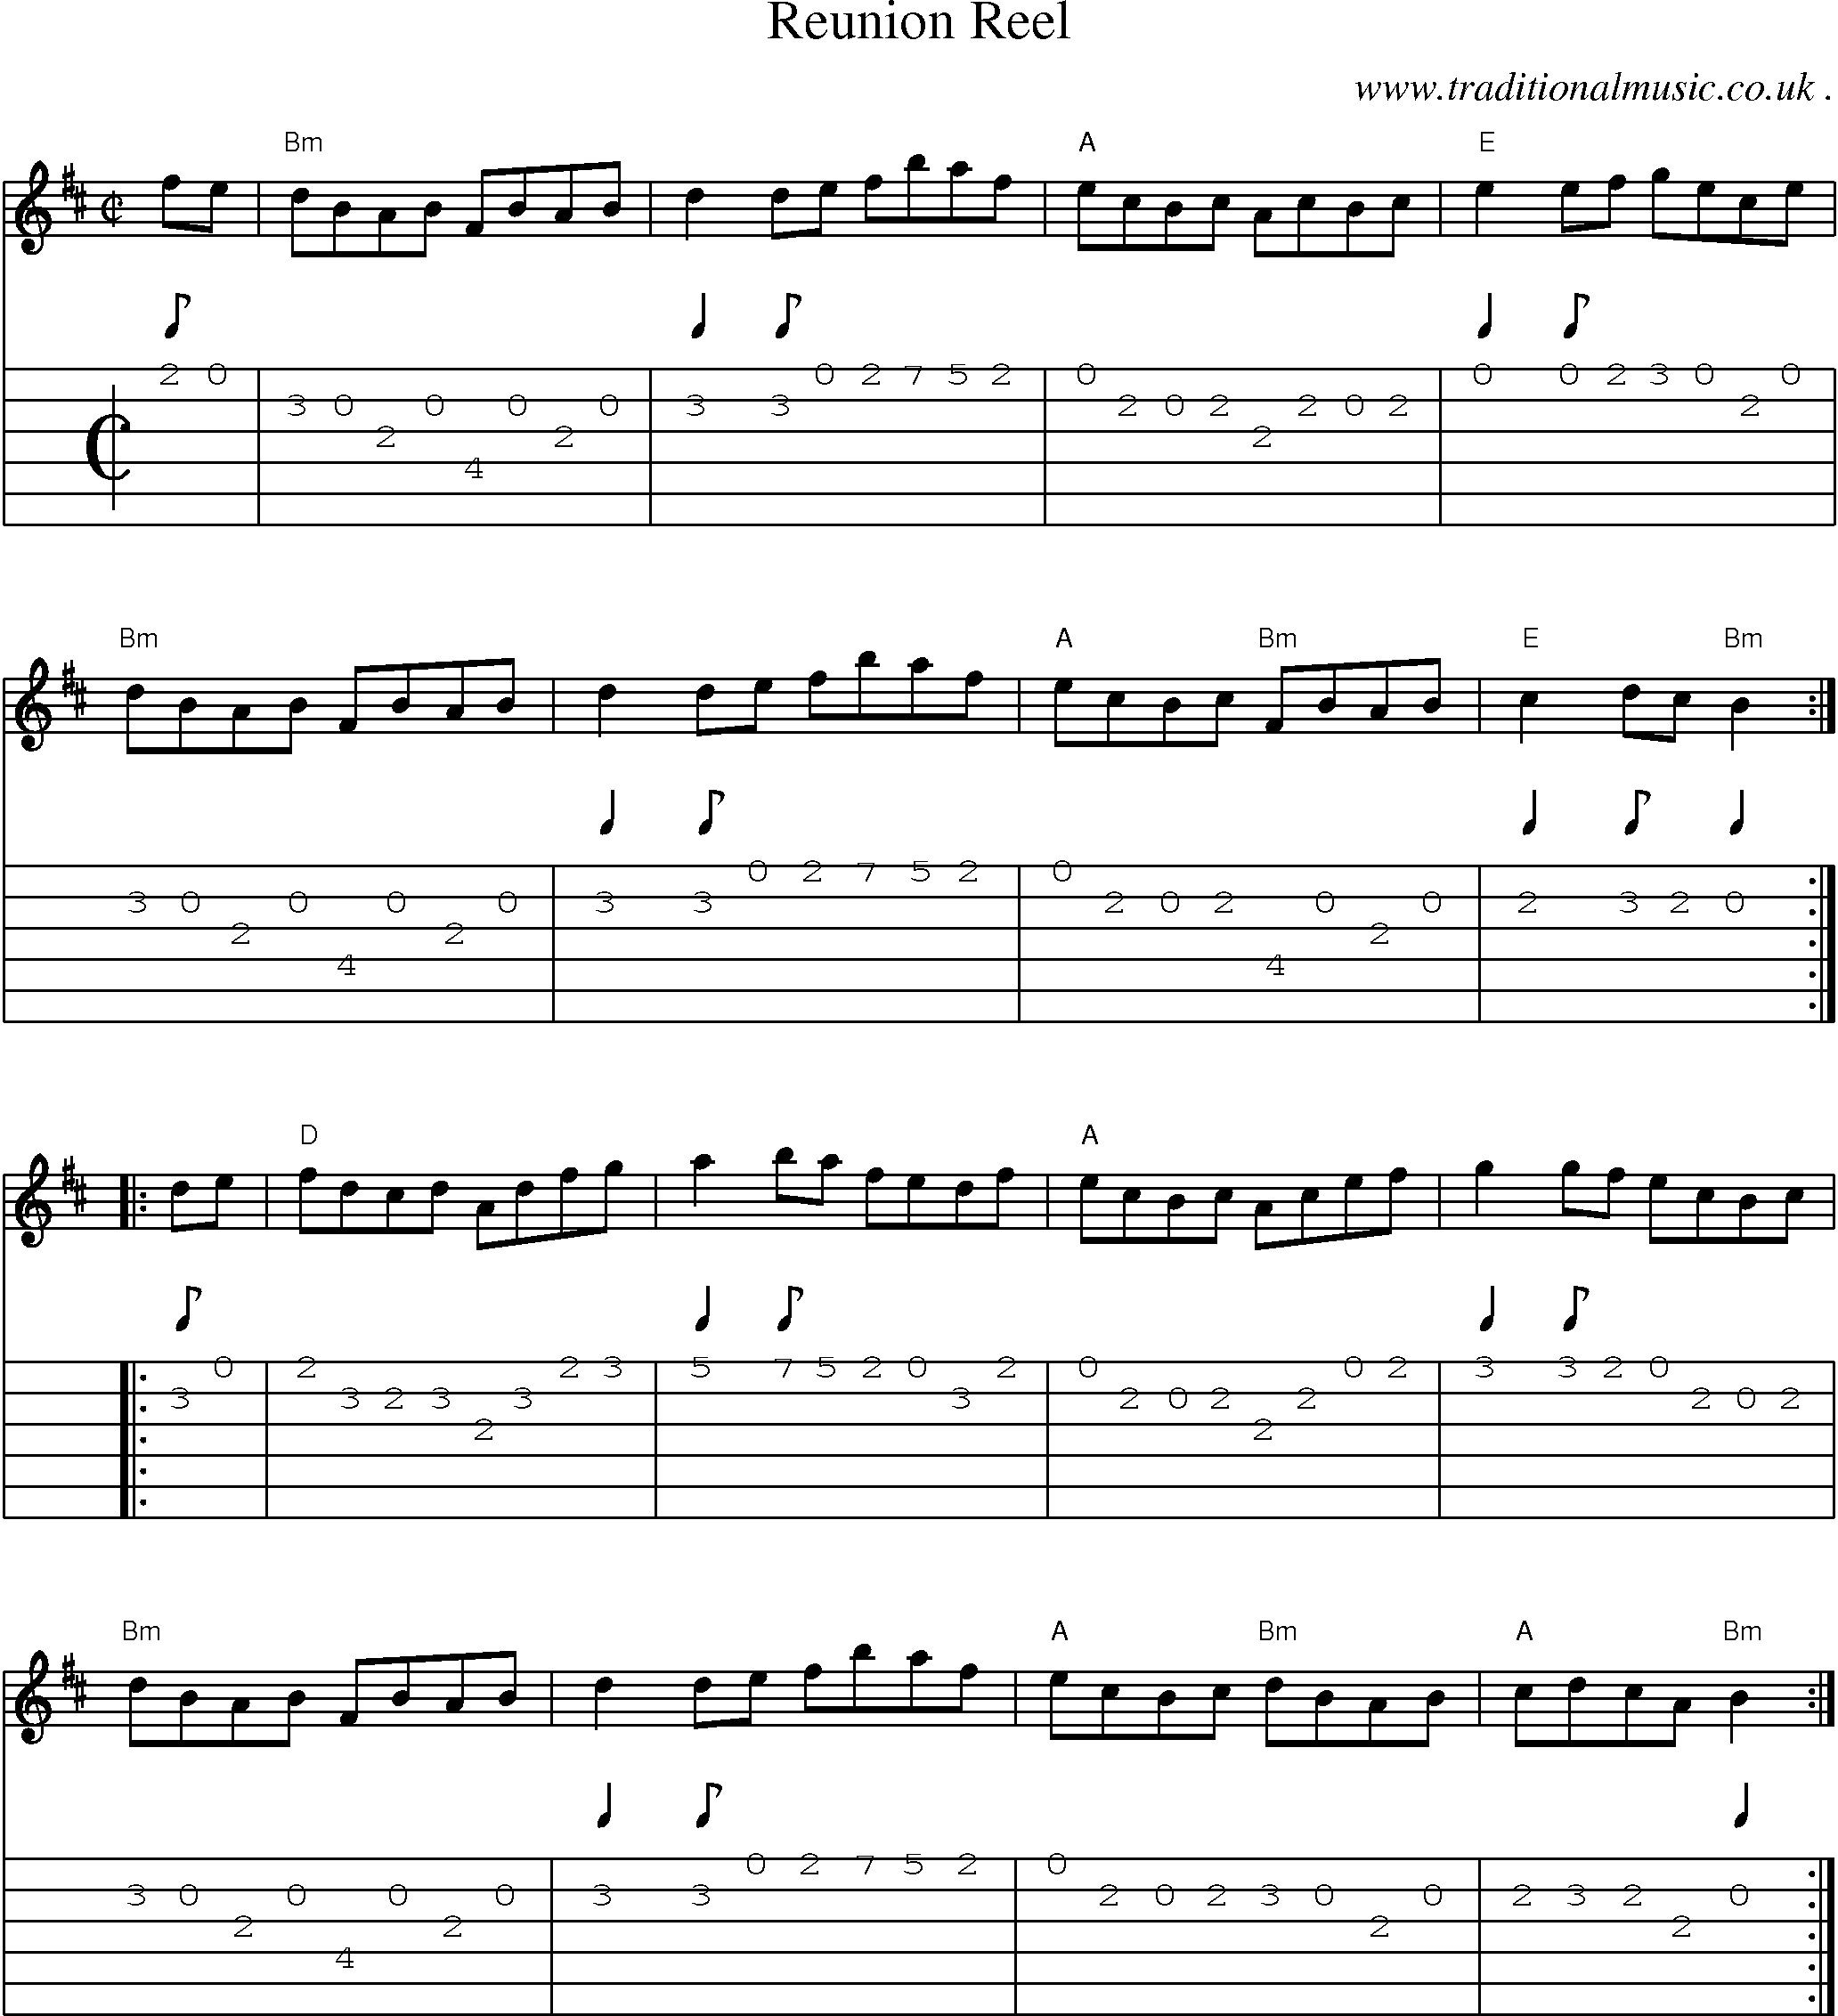 Music Score and Guitar Tabs for Reunion Reel